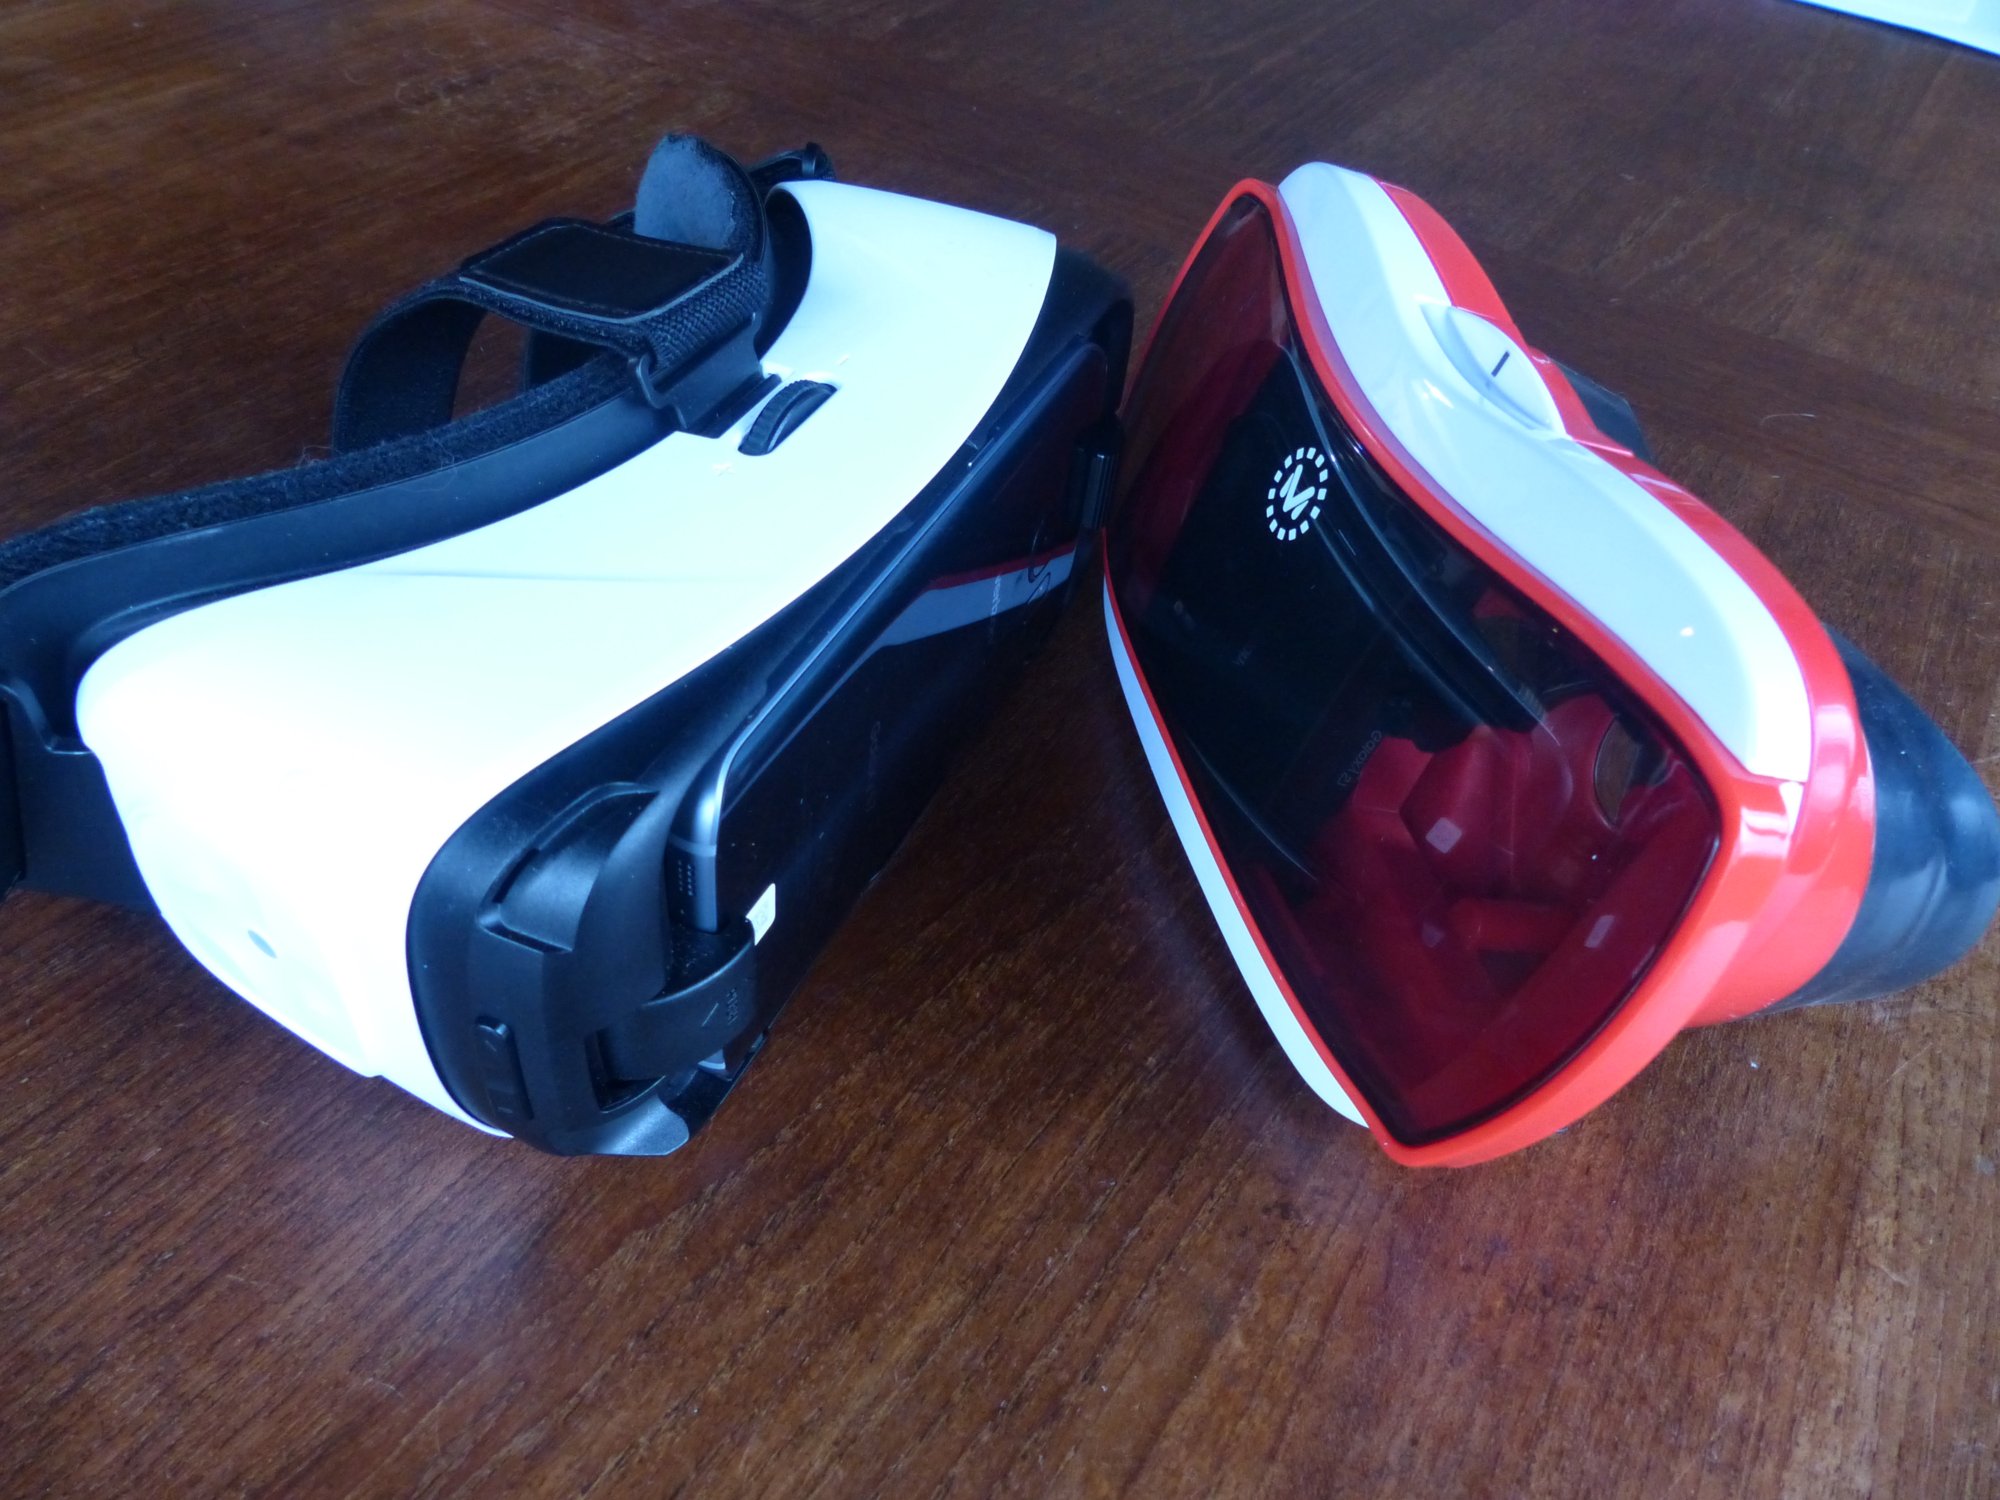 Photograph of two types of virtual reality goggles.